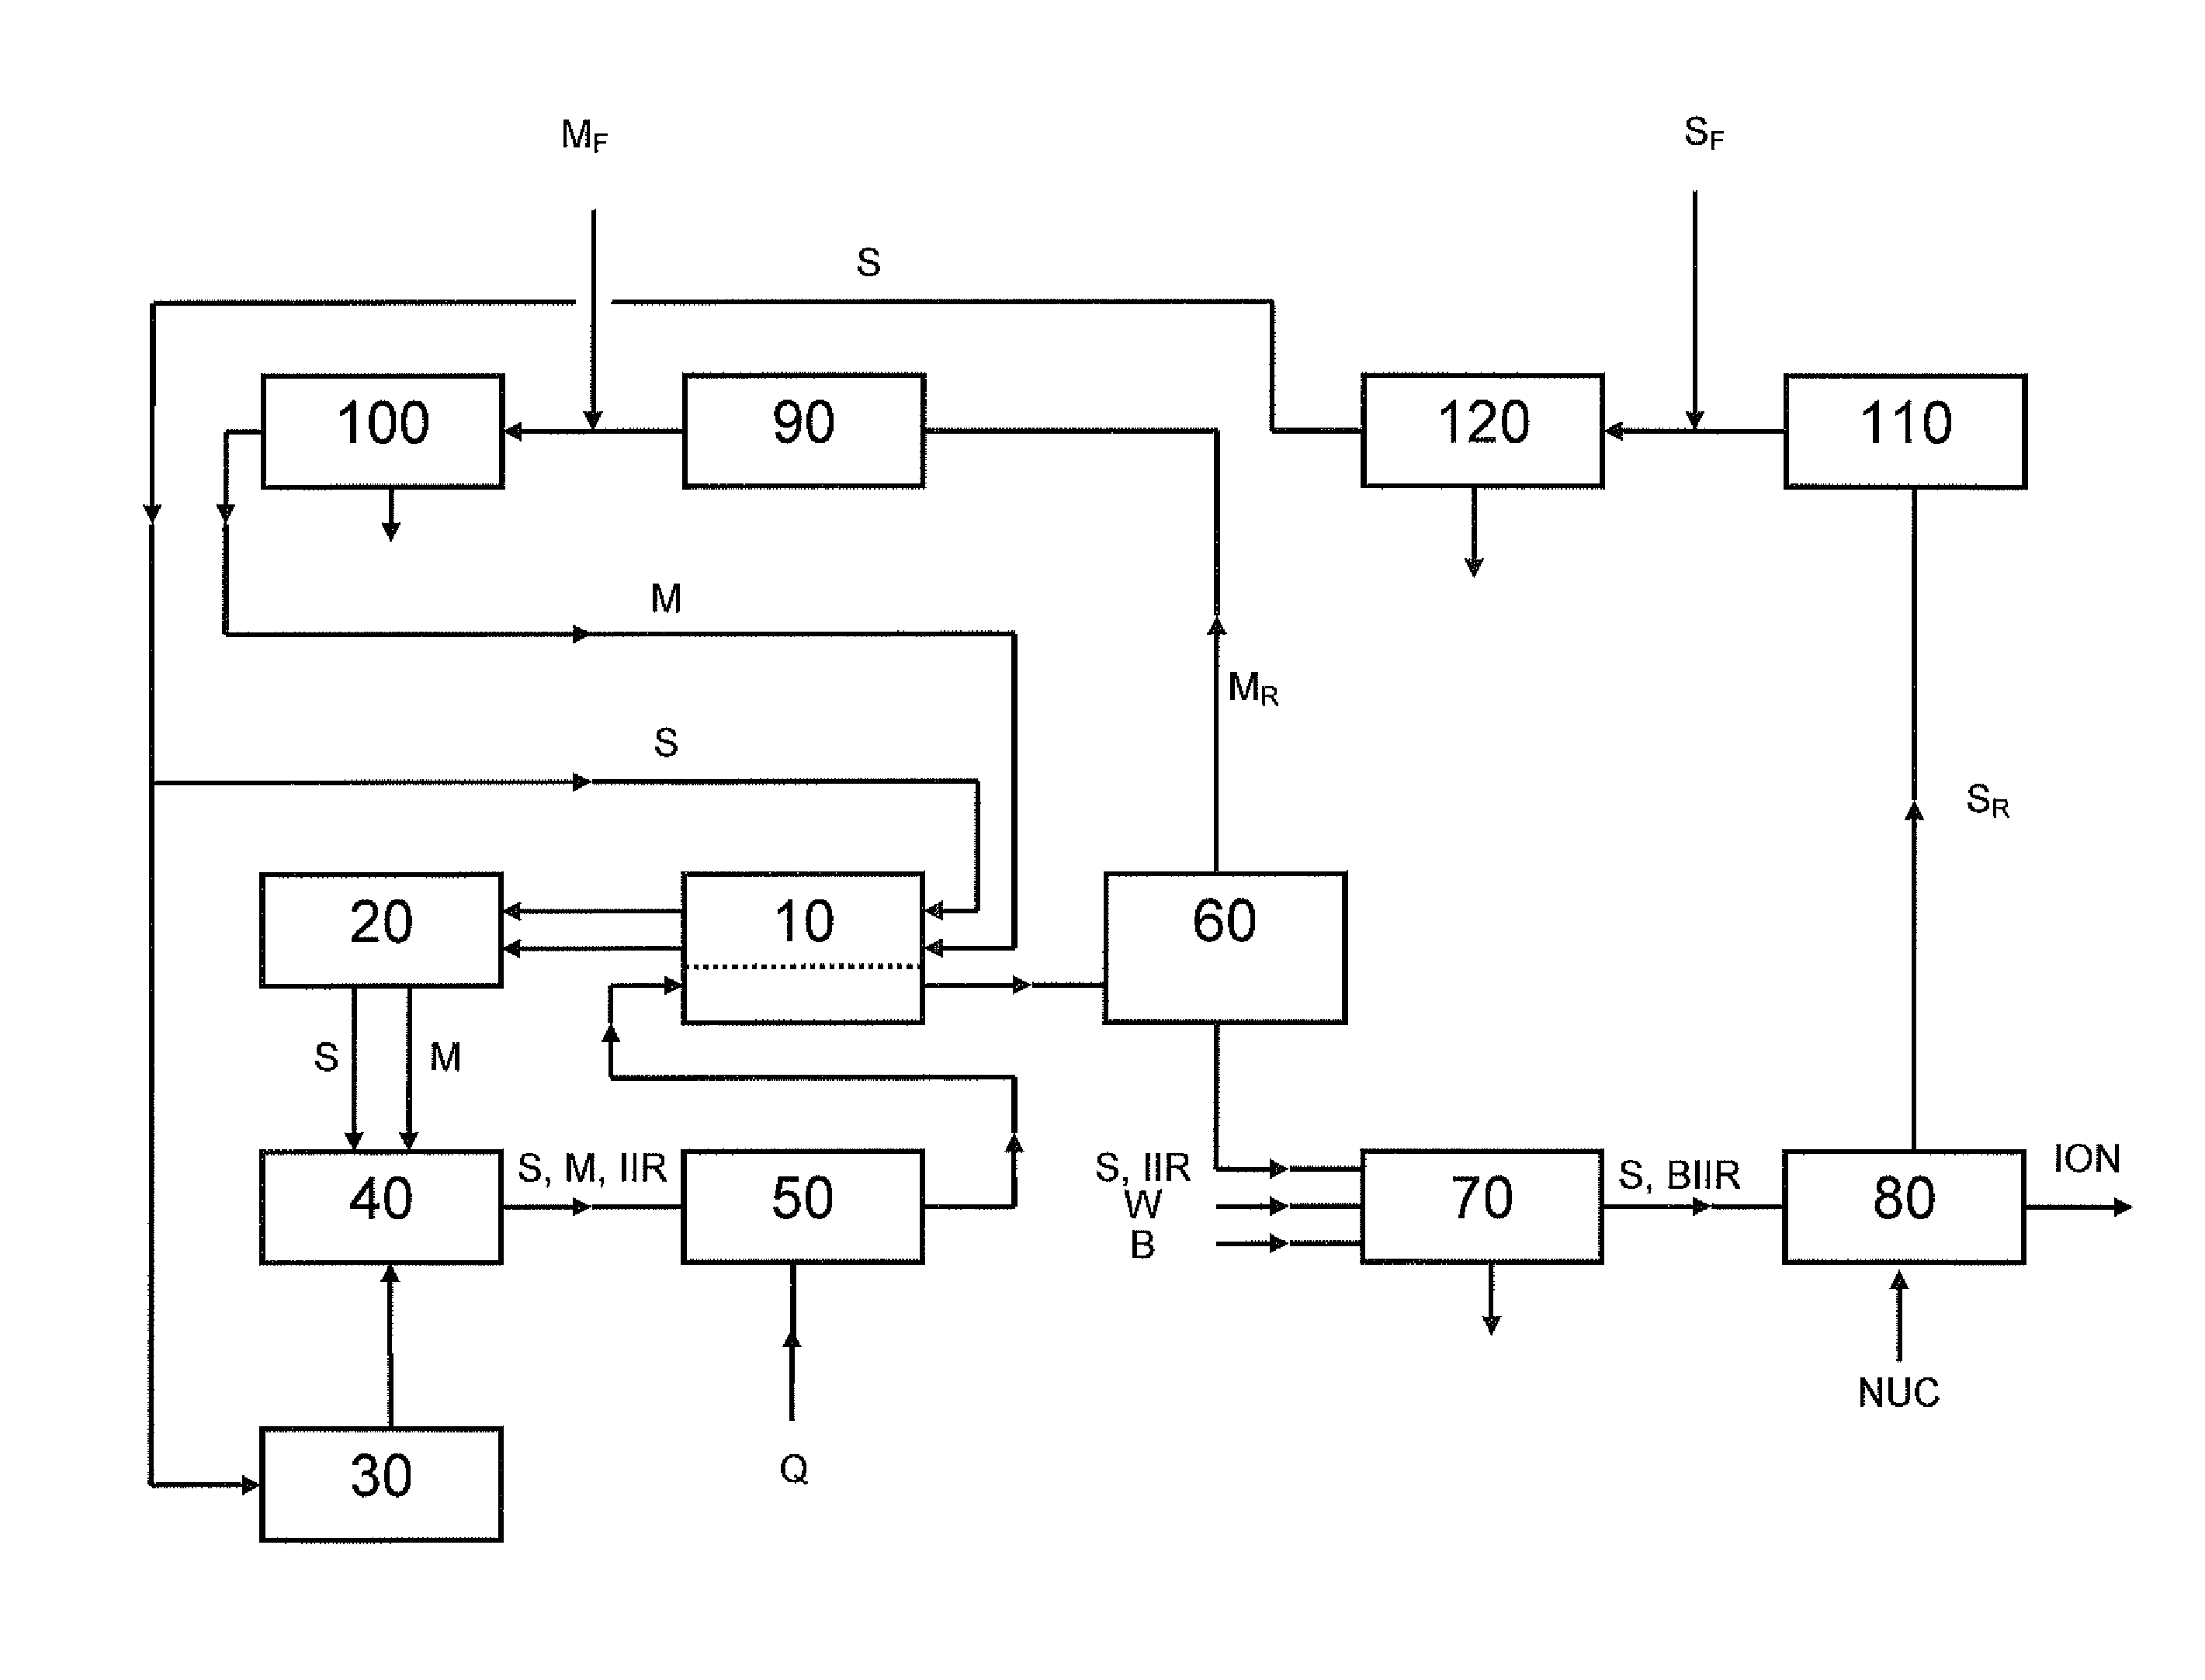 Process for production of halobutyl ionomers